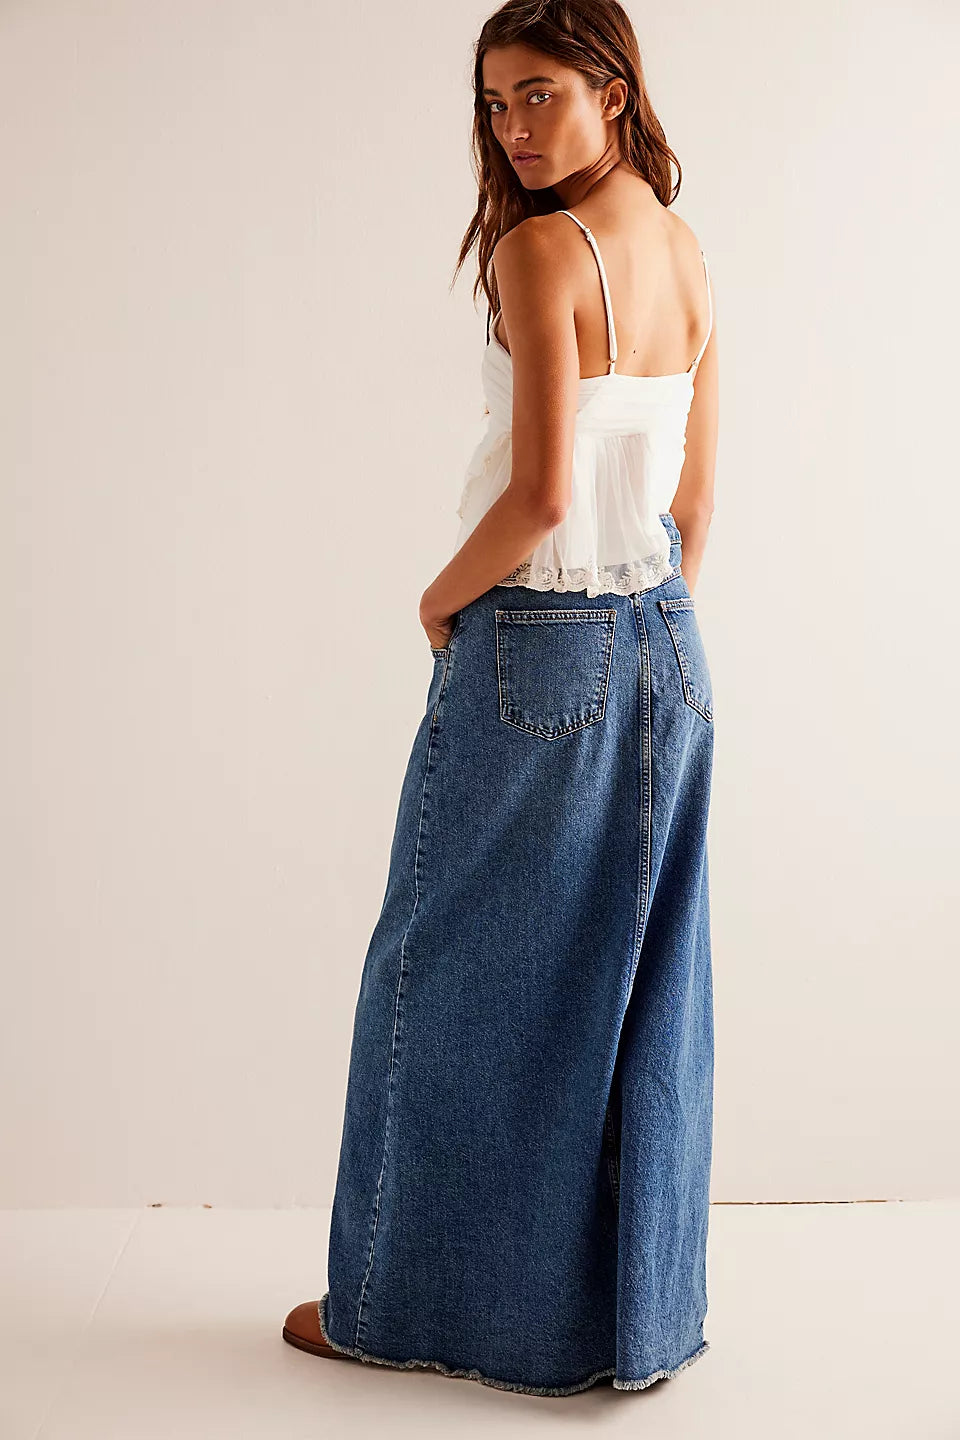 FREE PEOPLE WE THE FREE COME AS YOU ARE DENIM MAXI SKIRT DARK INDIGO